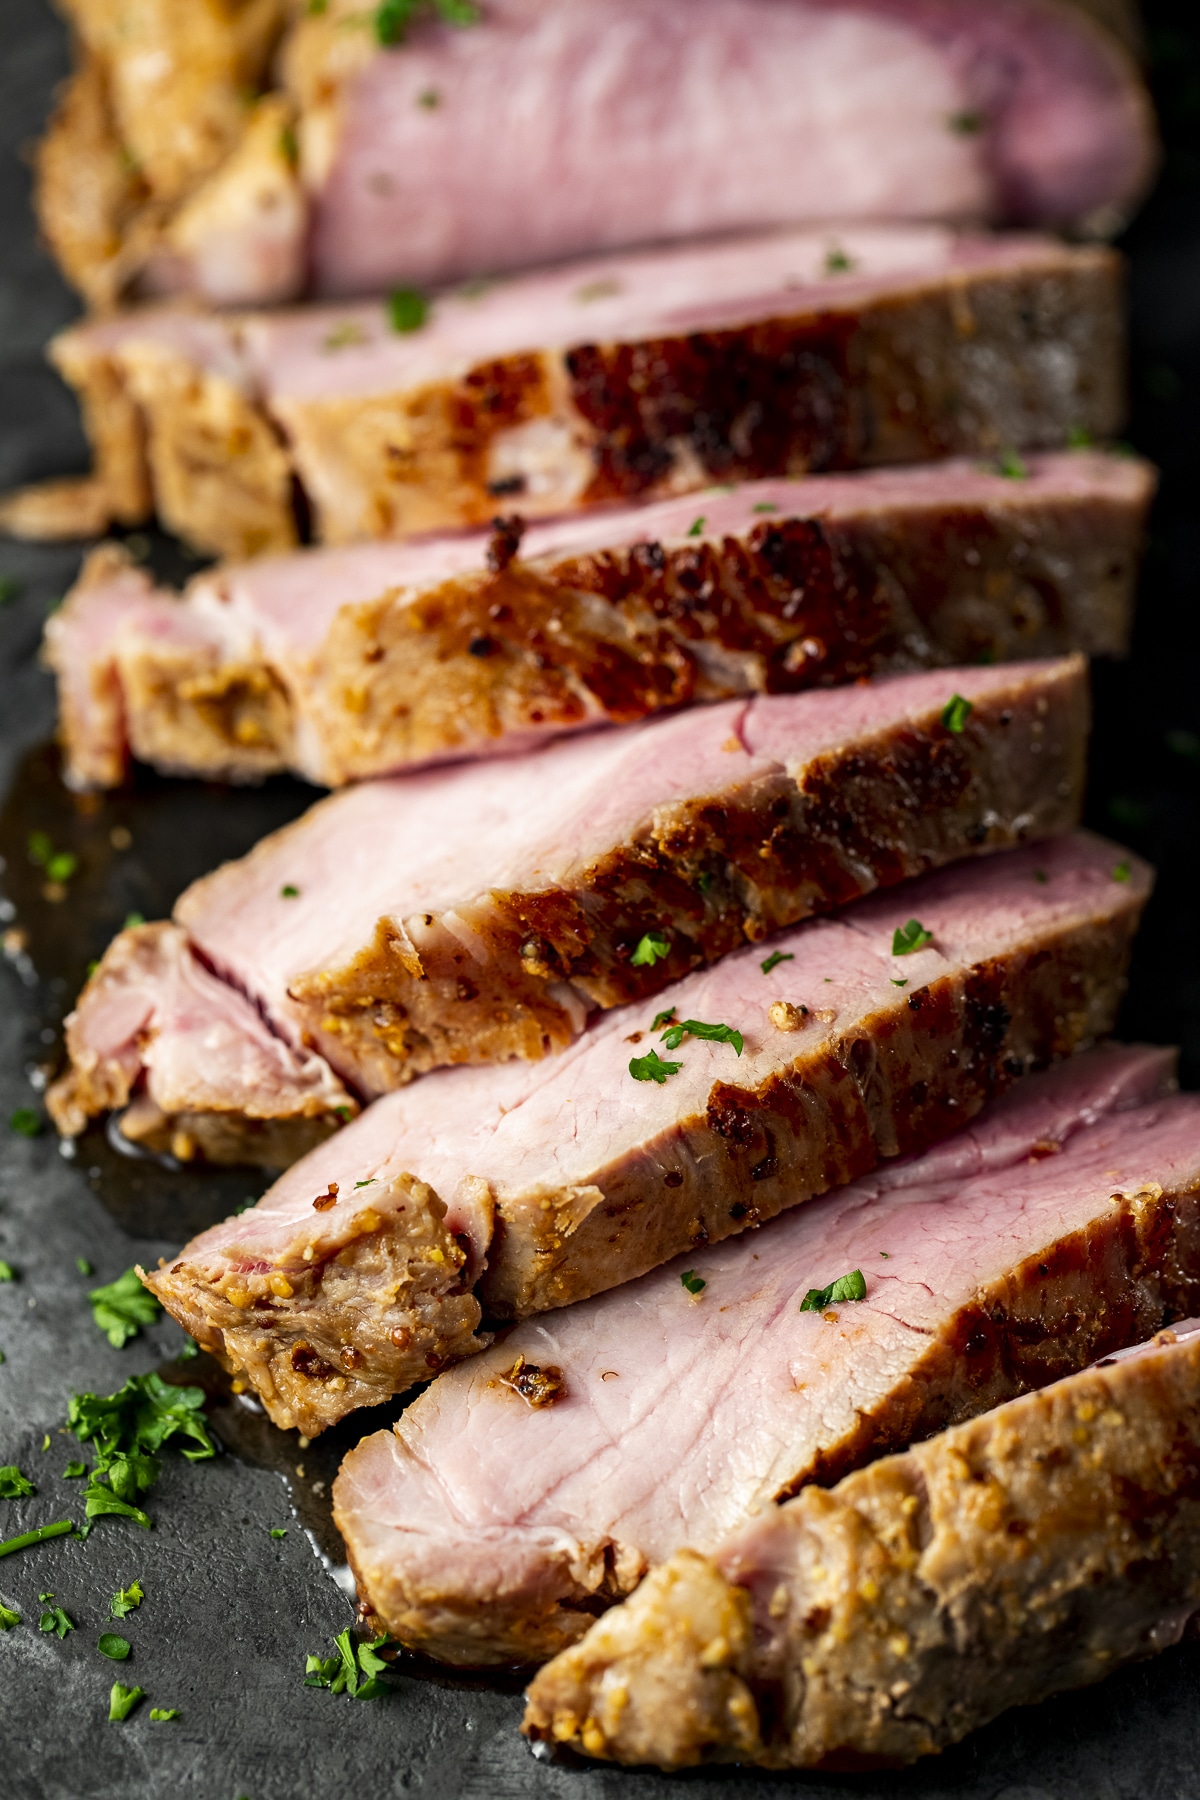 Slices of pork loin roast garnished with fresh parsley.